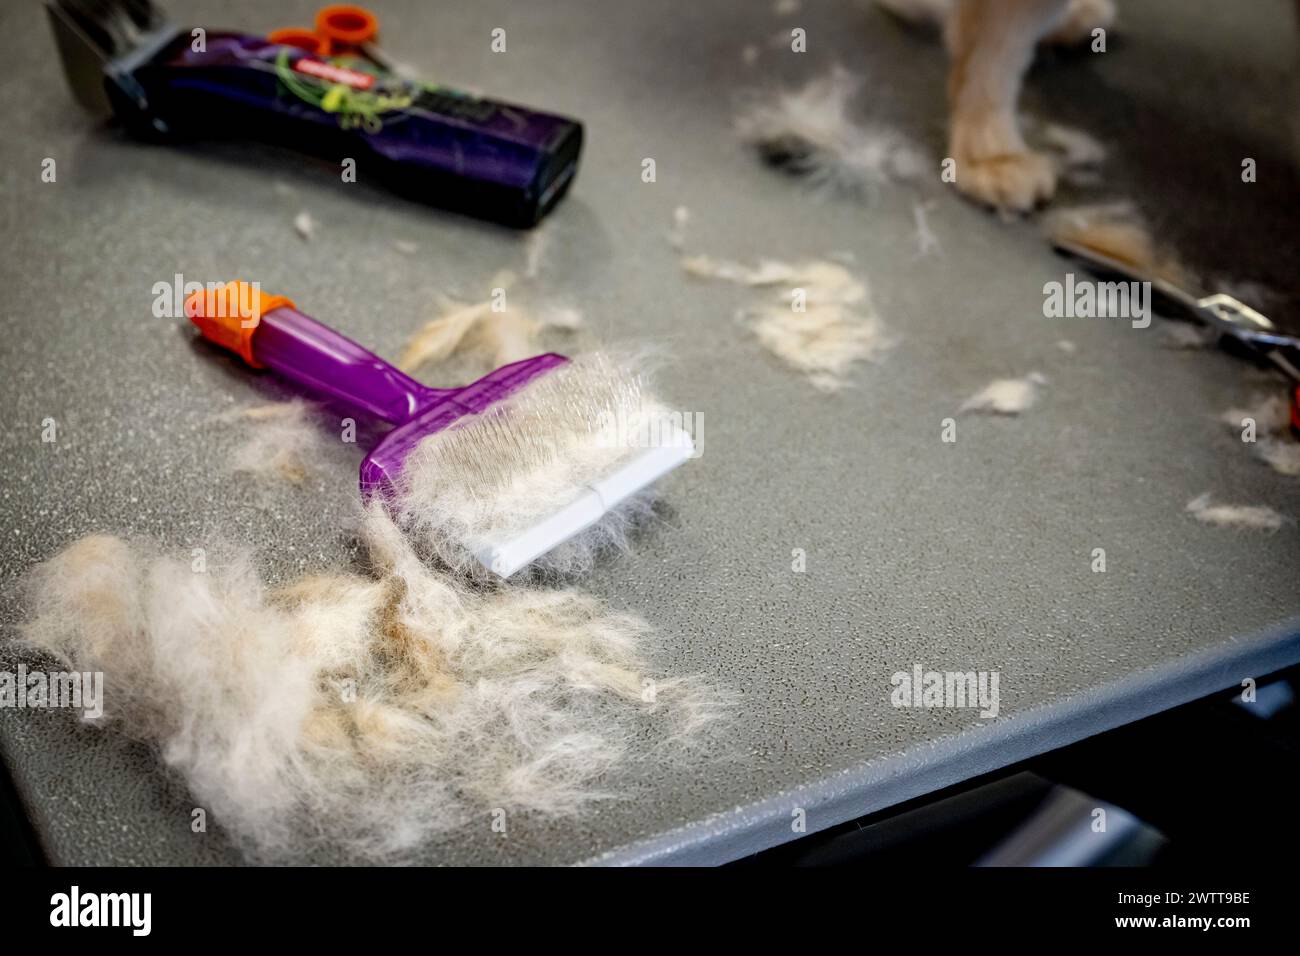 A pet grooming station posthaircut with fur clippings scattered around grooming tools. Stock Photo